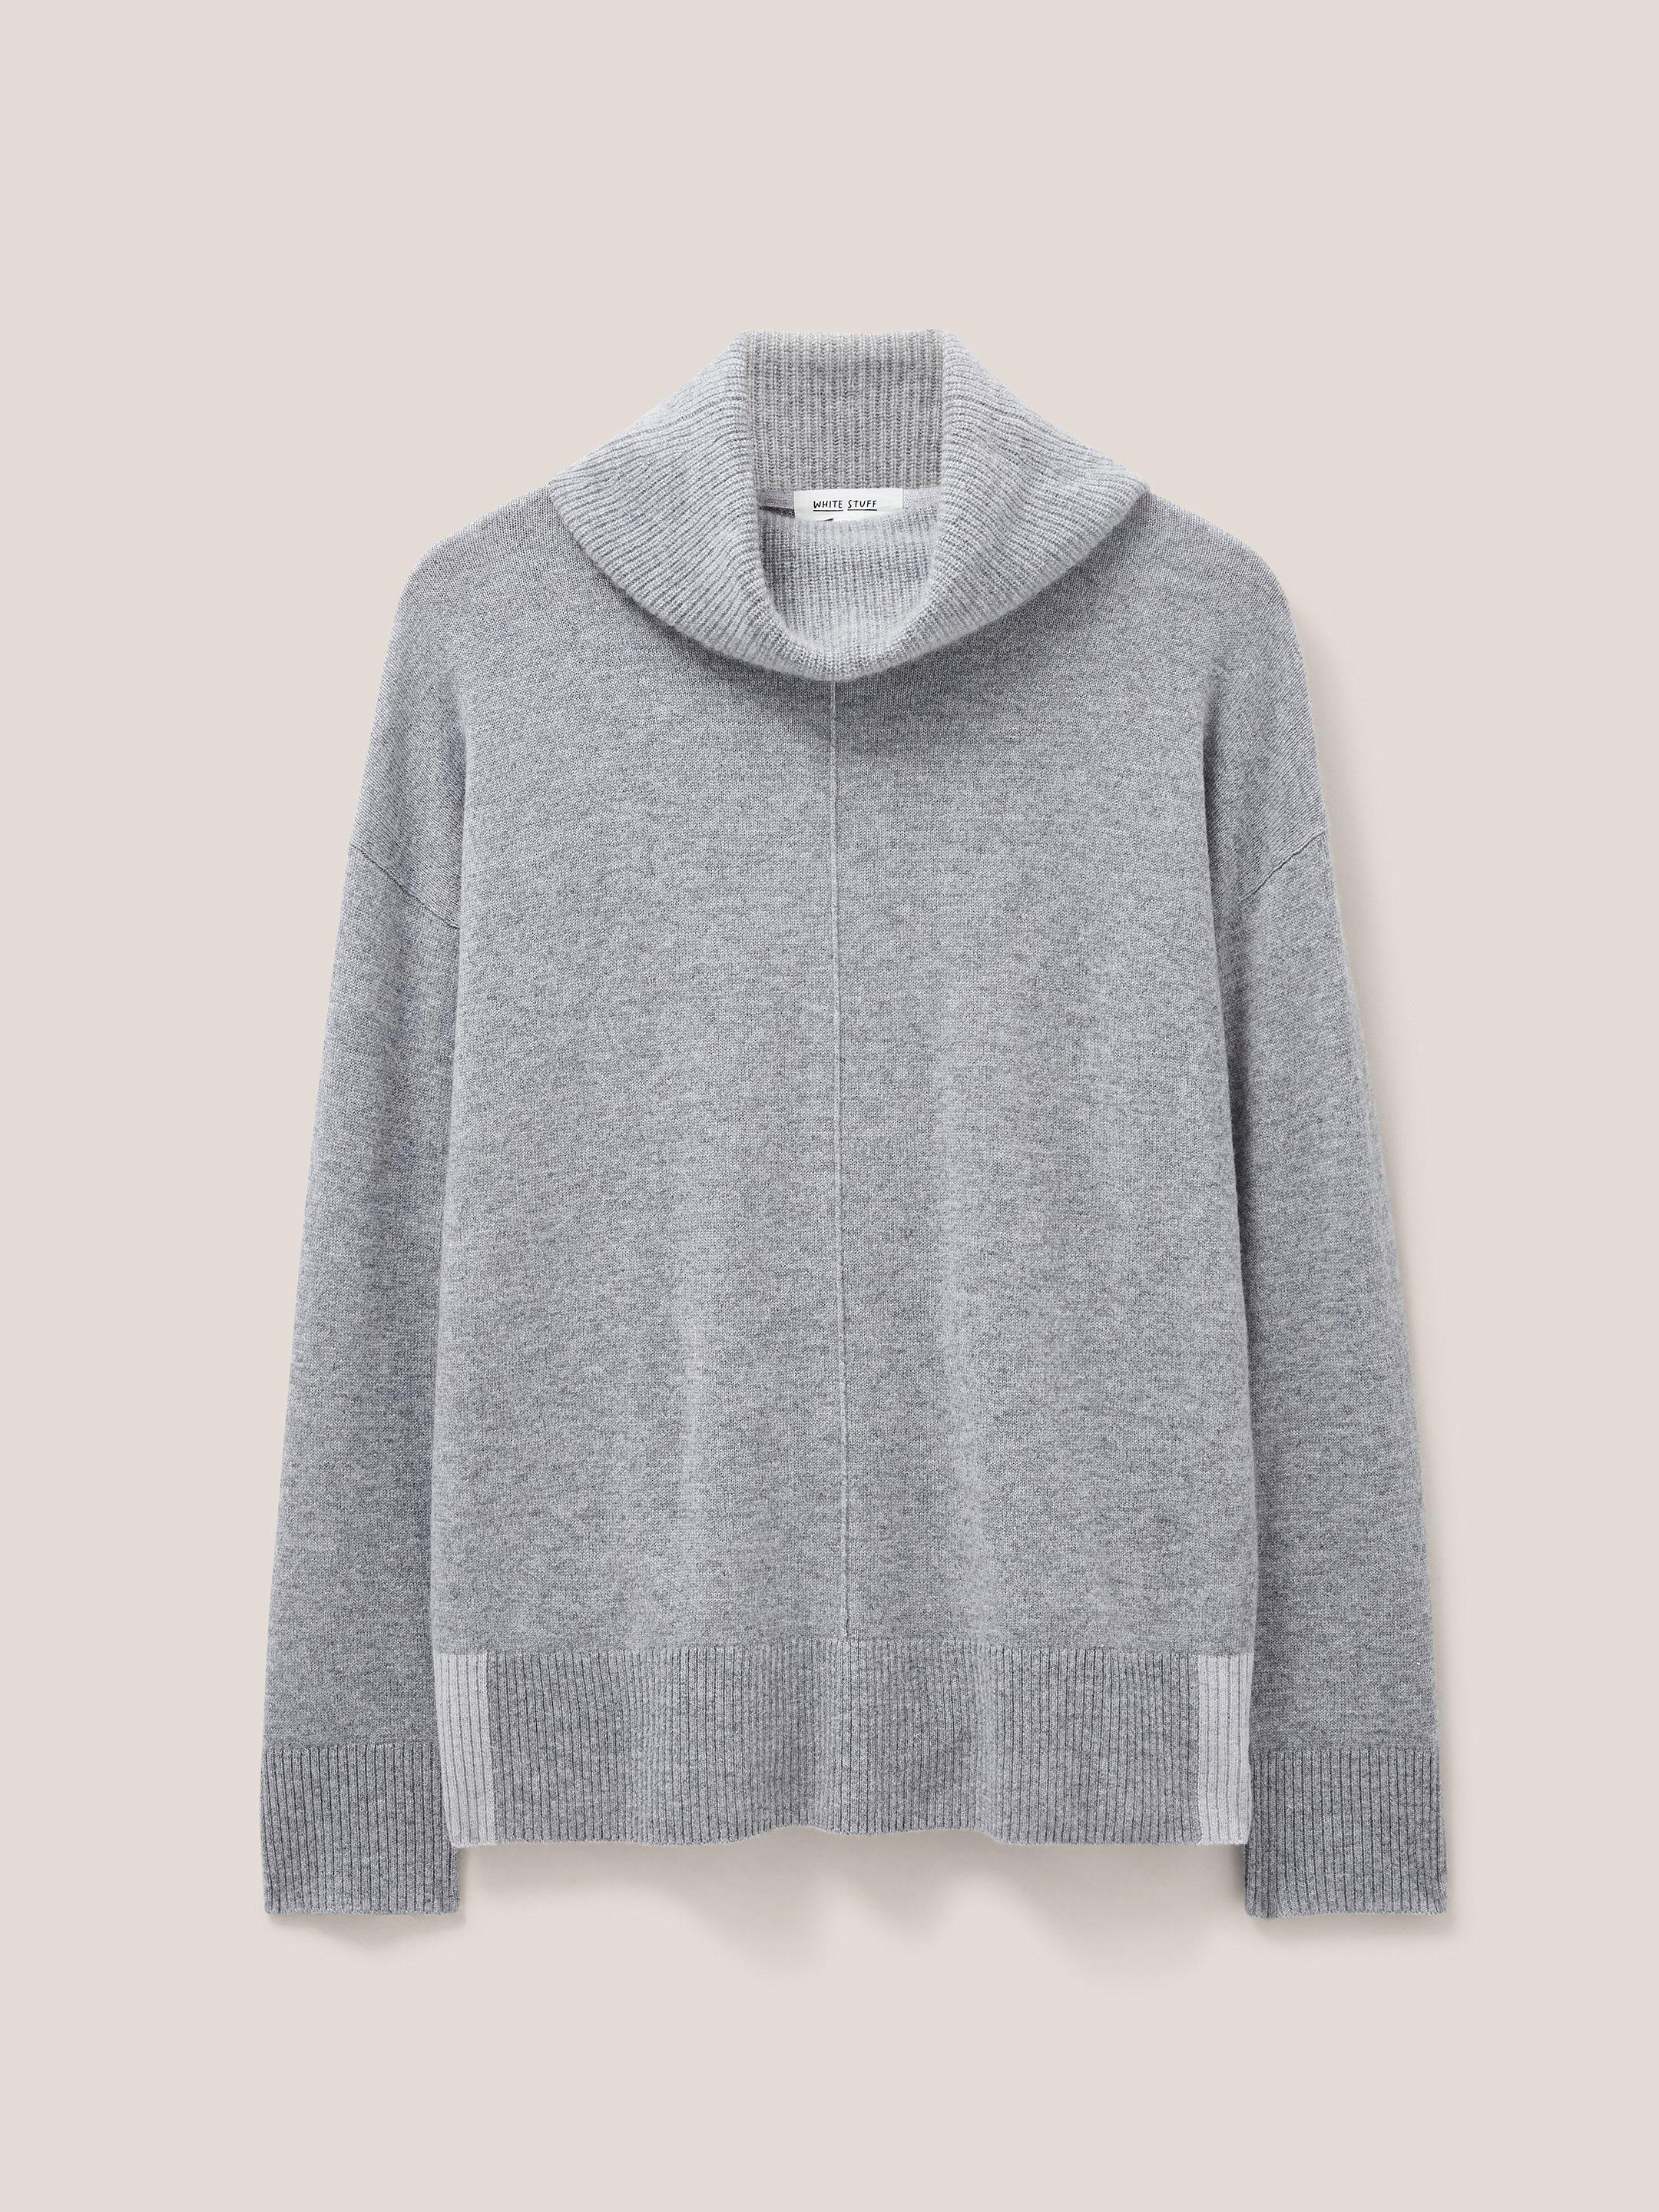 CALLIE H NECK CASHMERE JUMPER in MID GREY - FLAT FRONT